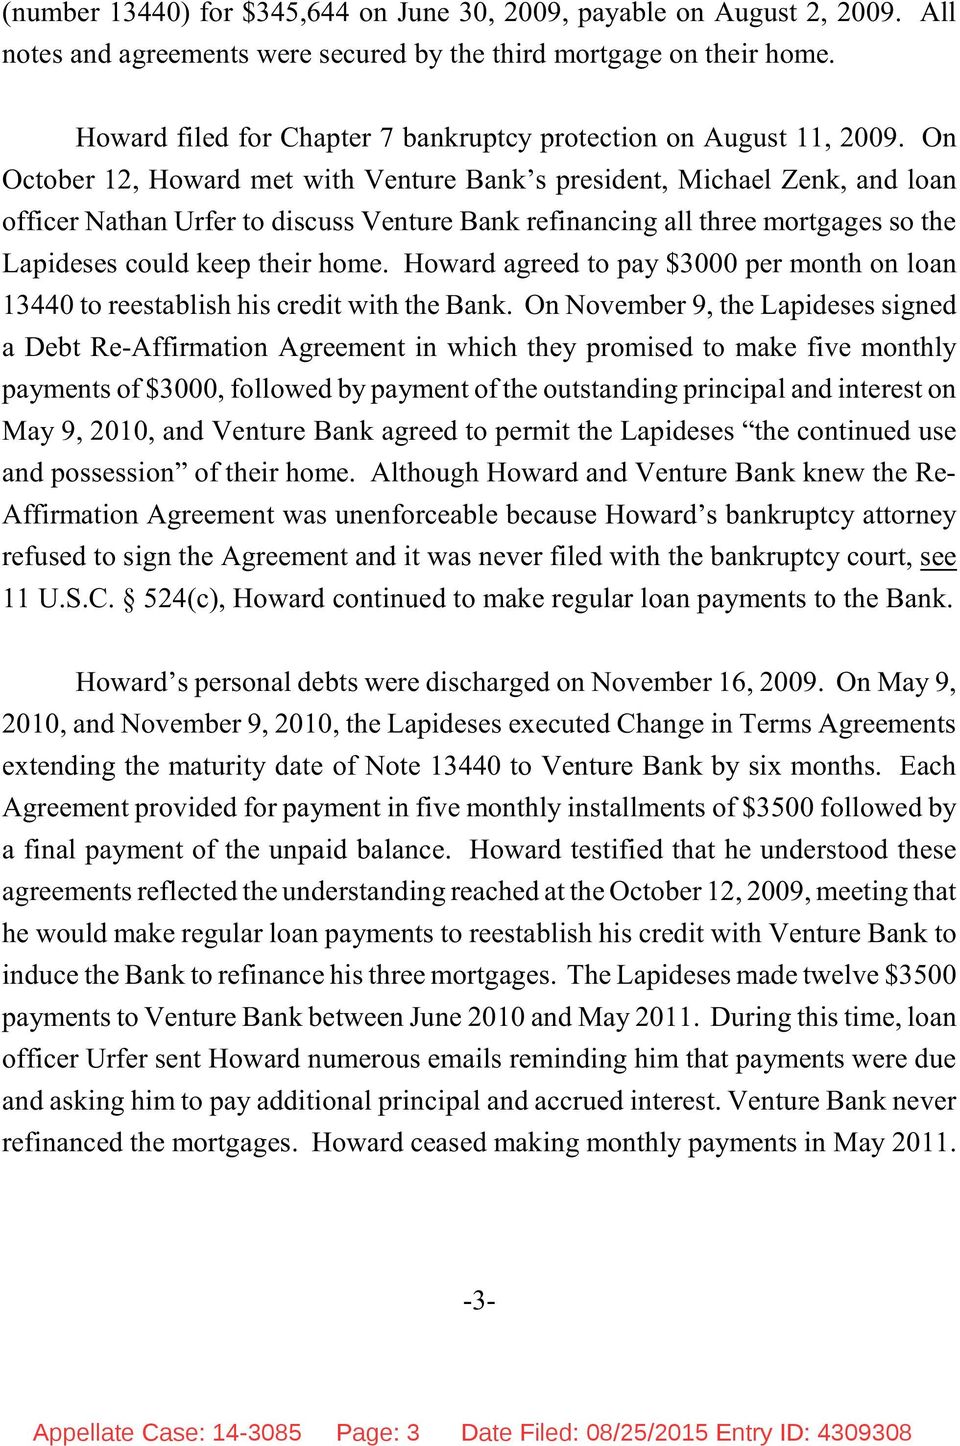 On May 9, 2010, and November 9, 2010, the Lapideses executed Change in Terms Agreements extending the maturity date of Note 13440 to Venture Bank by six months.